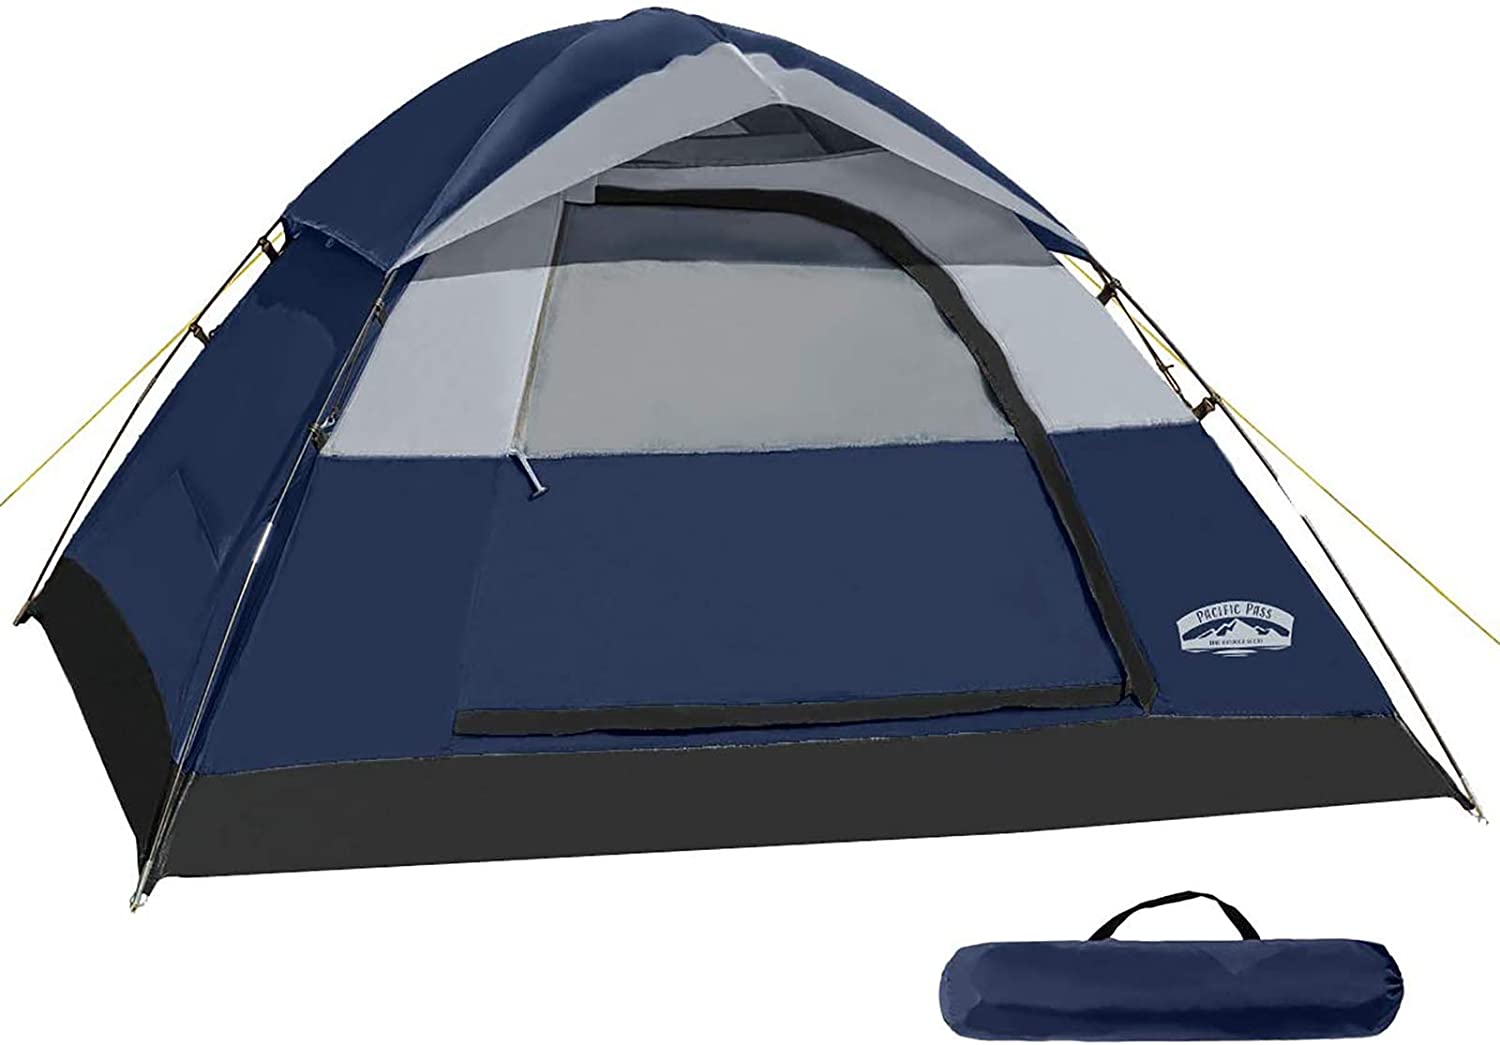  7. Pacific Pass Camping Tent 